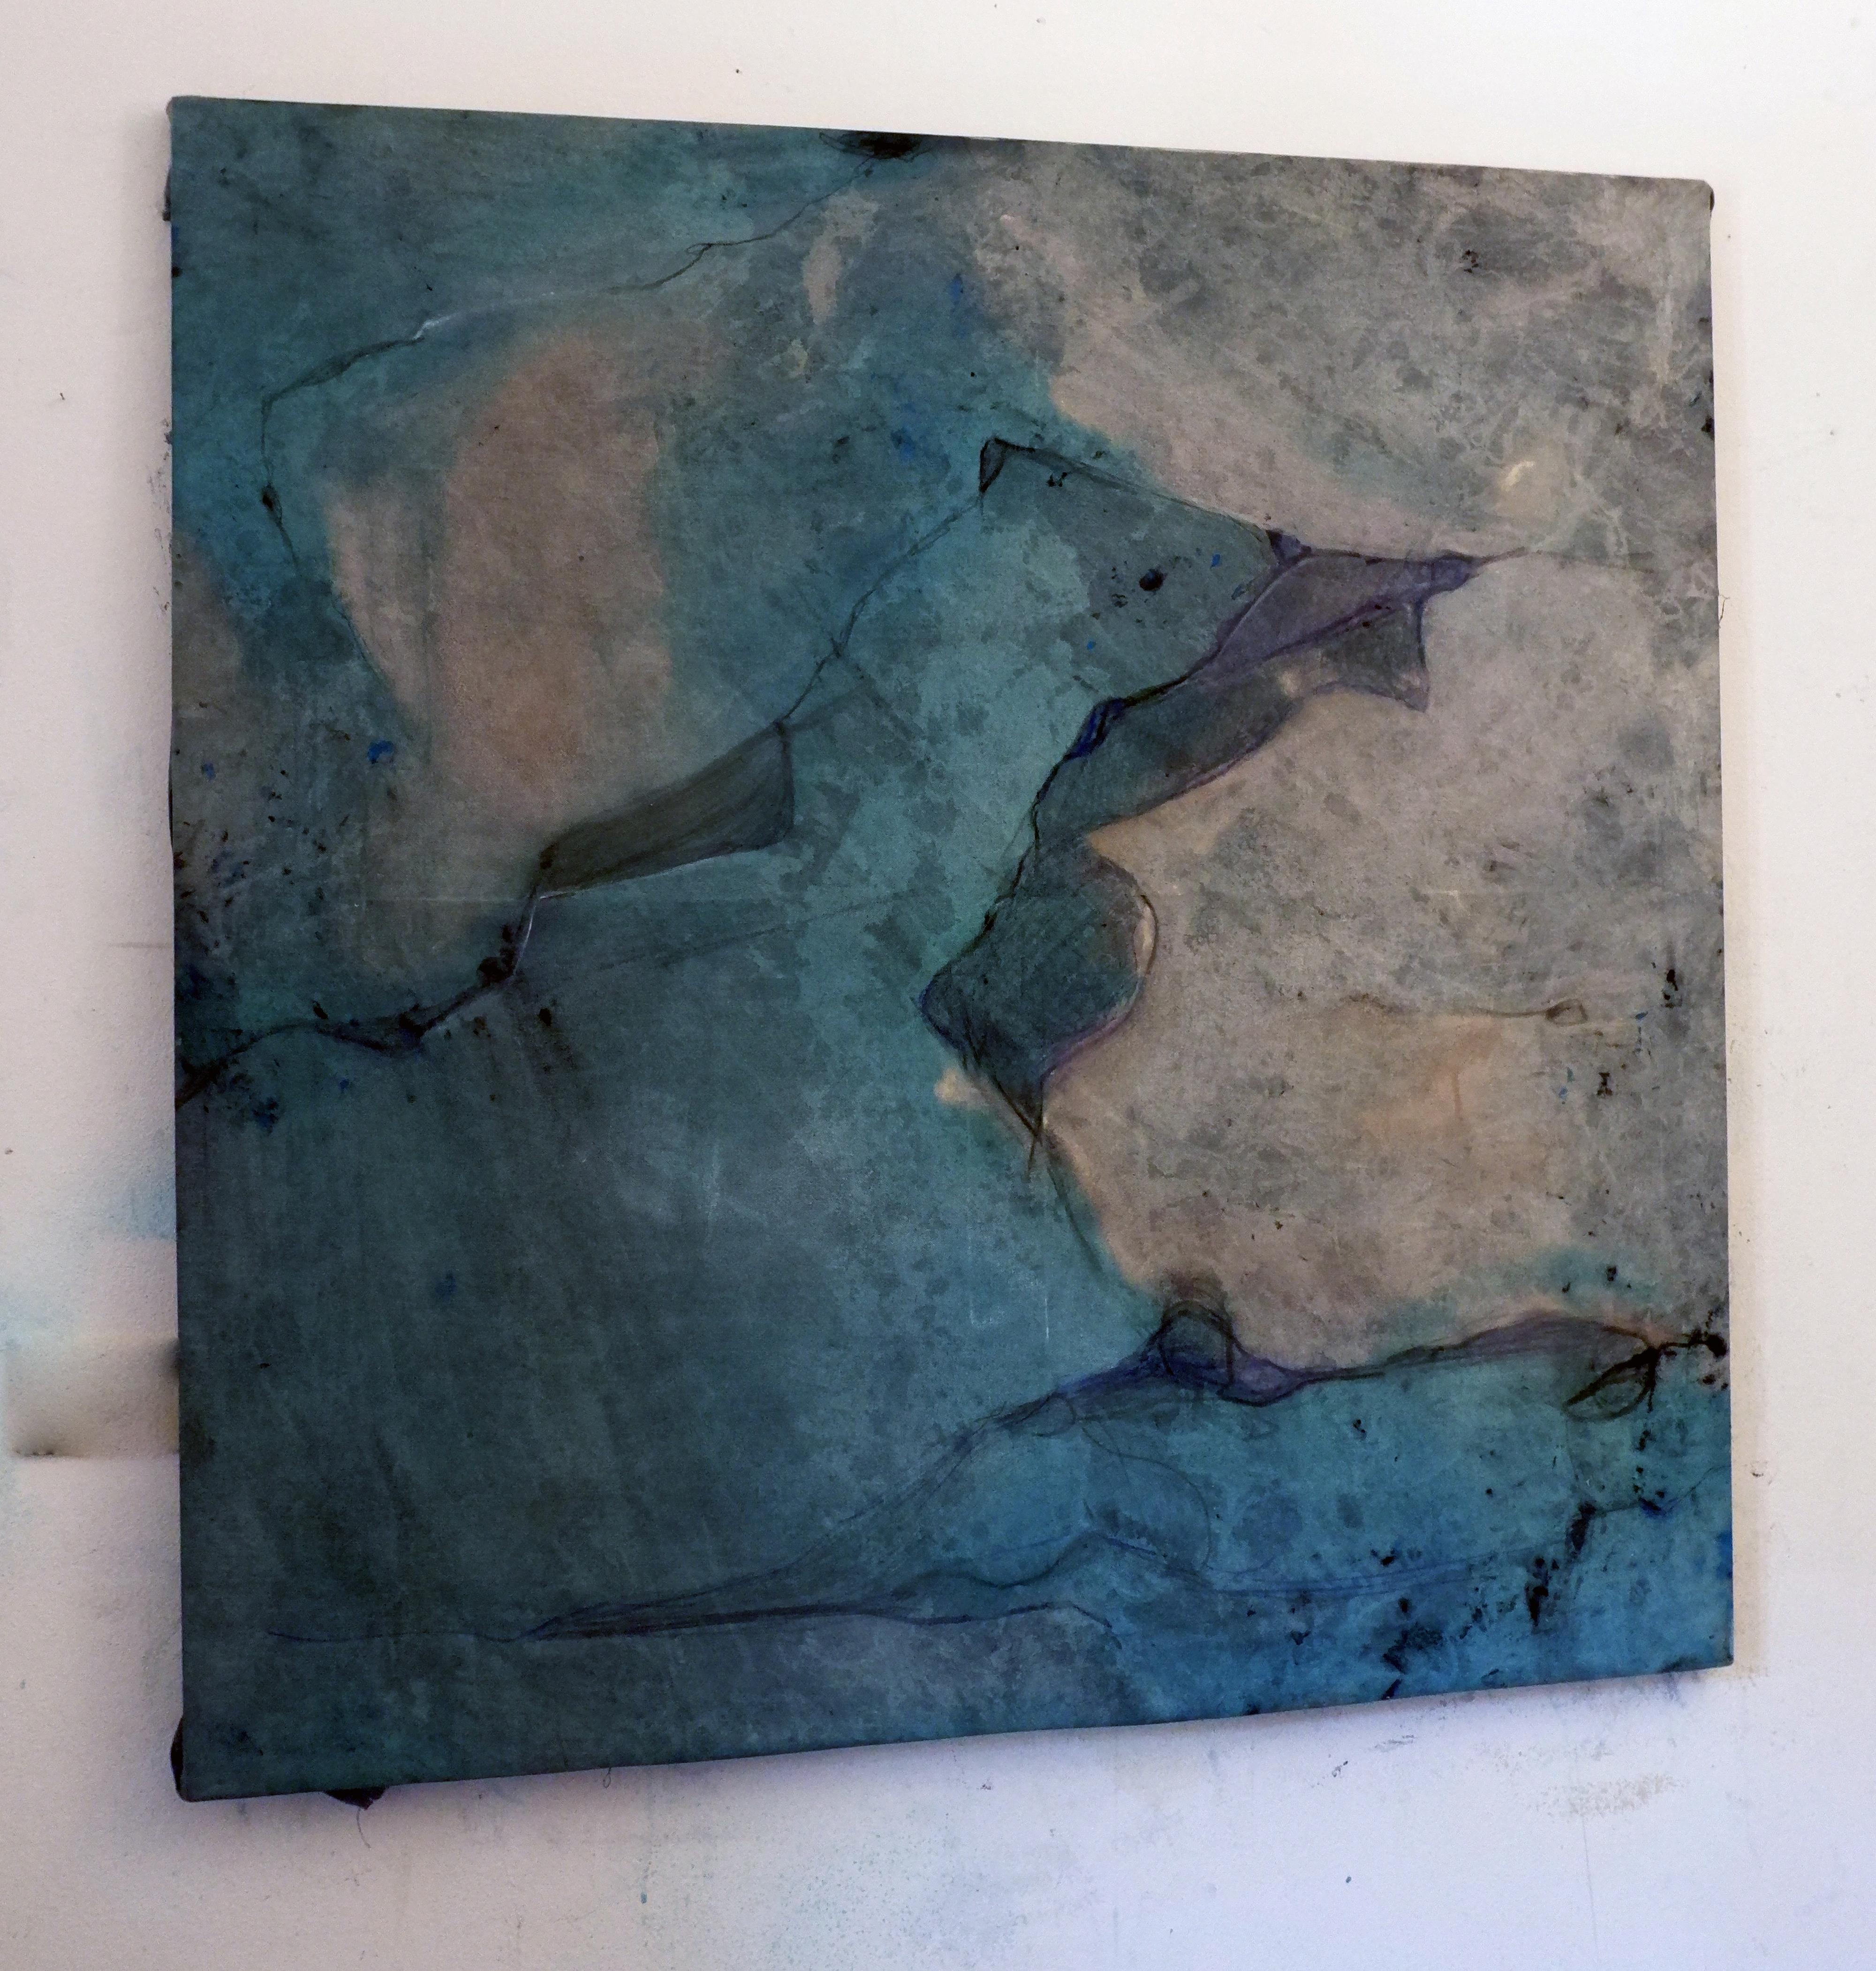 'Landscape 98' is an original minimalist abstract art on canvas by emerging Sicilian artist - Marilina Marchica. It is a natural looking mixed media painting on canvas. The subject is focused on Italian nature, mountain terrain, sea views, decaying